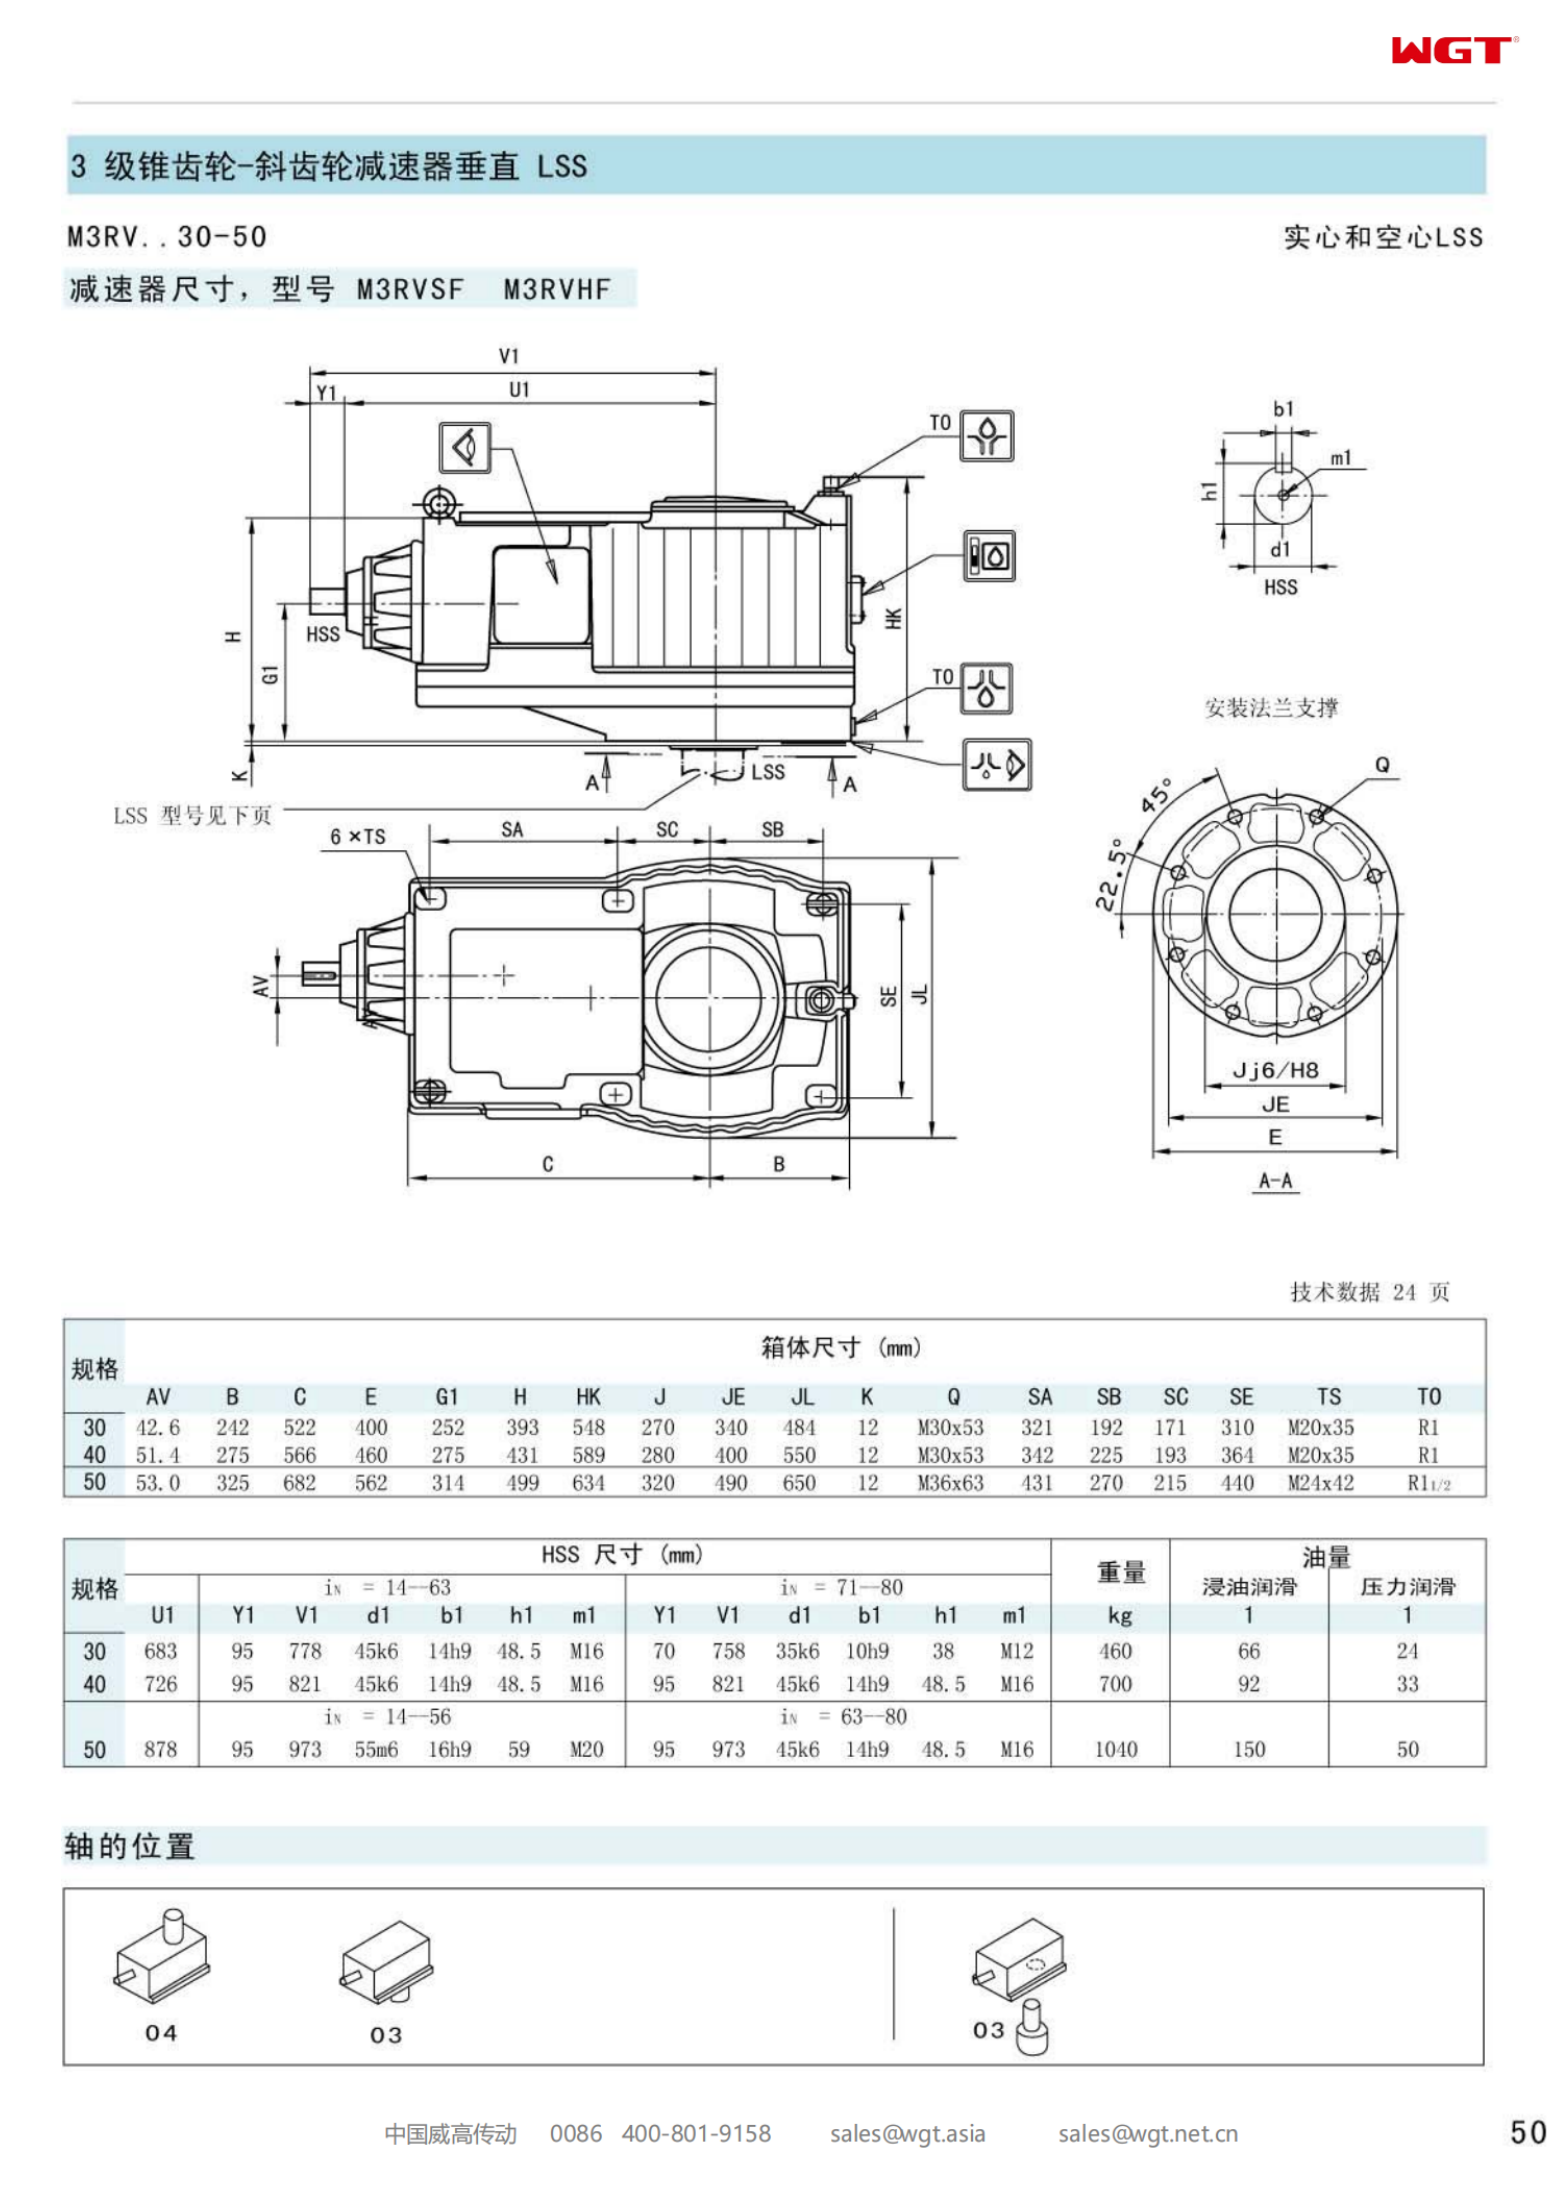 M4PVHF80 Replace_SEW_M_Series Gearbox